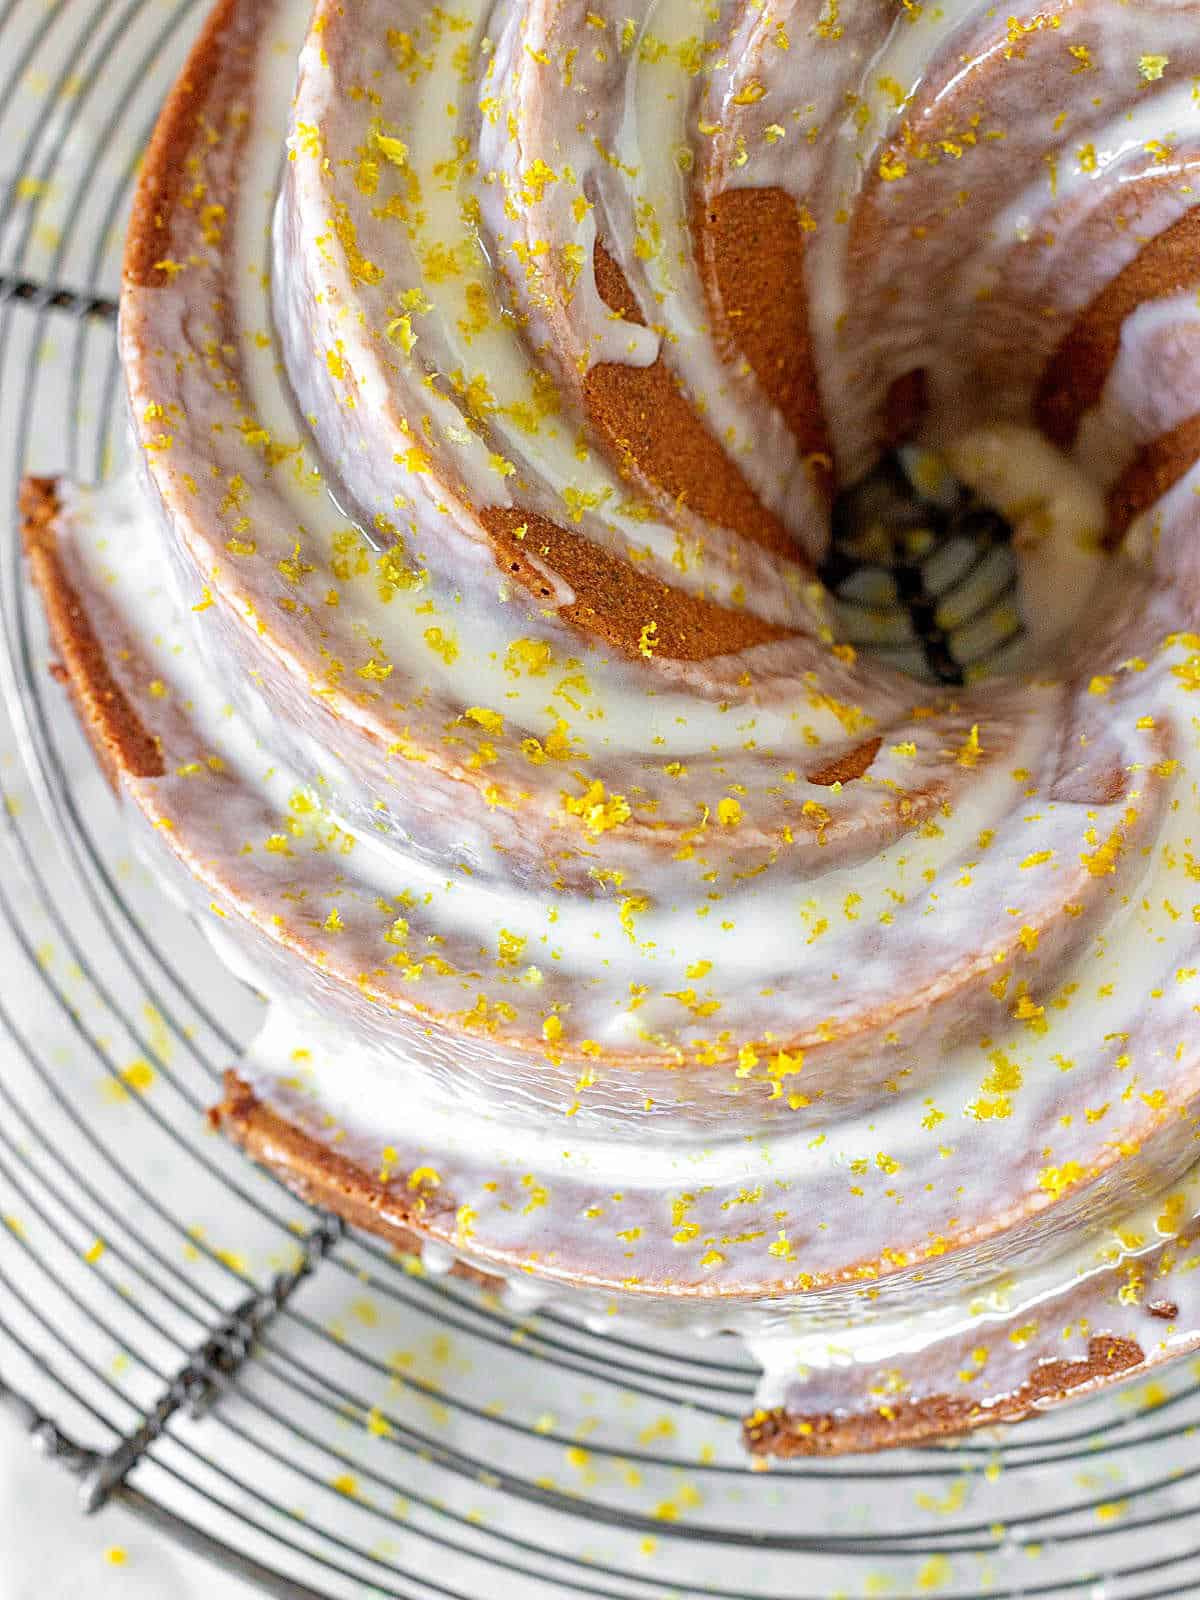 Top view of partial glazed bundt cake with lemon zest on a wire rack.